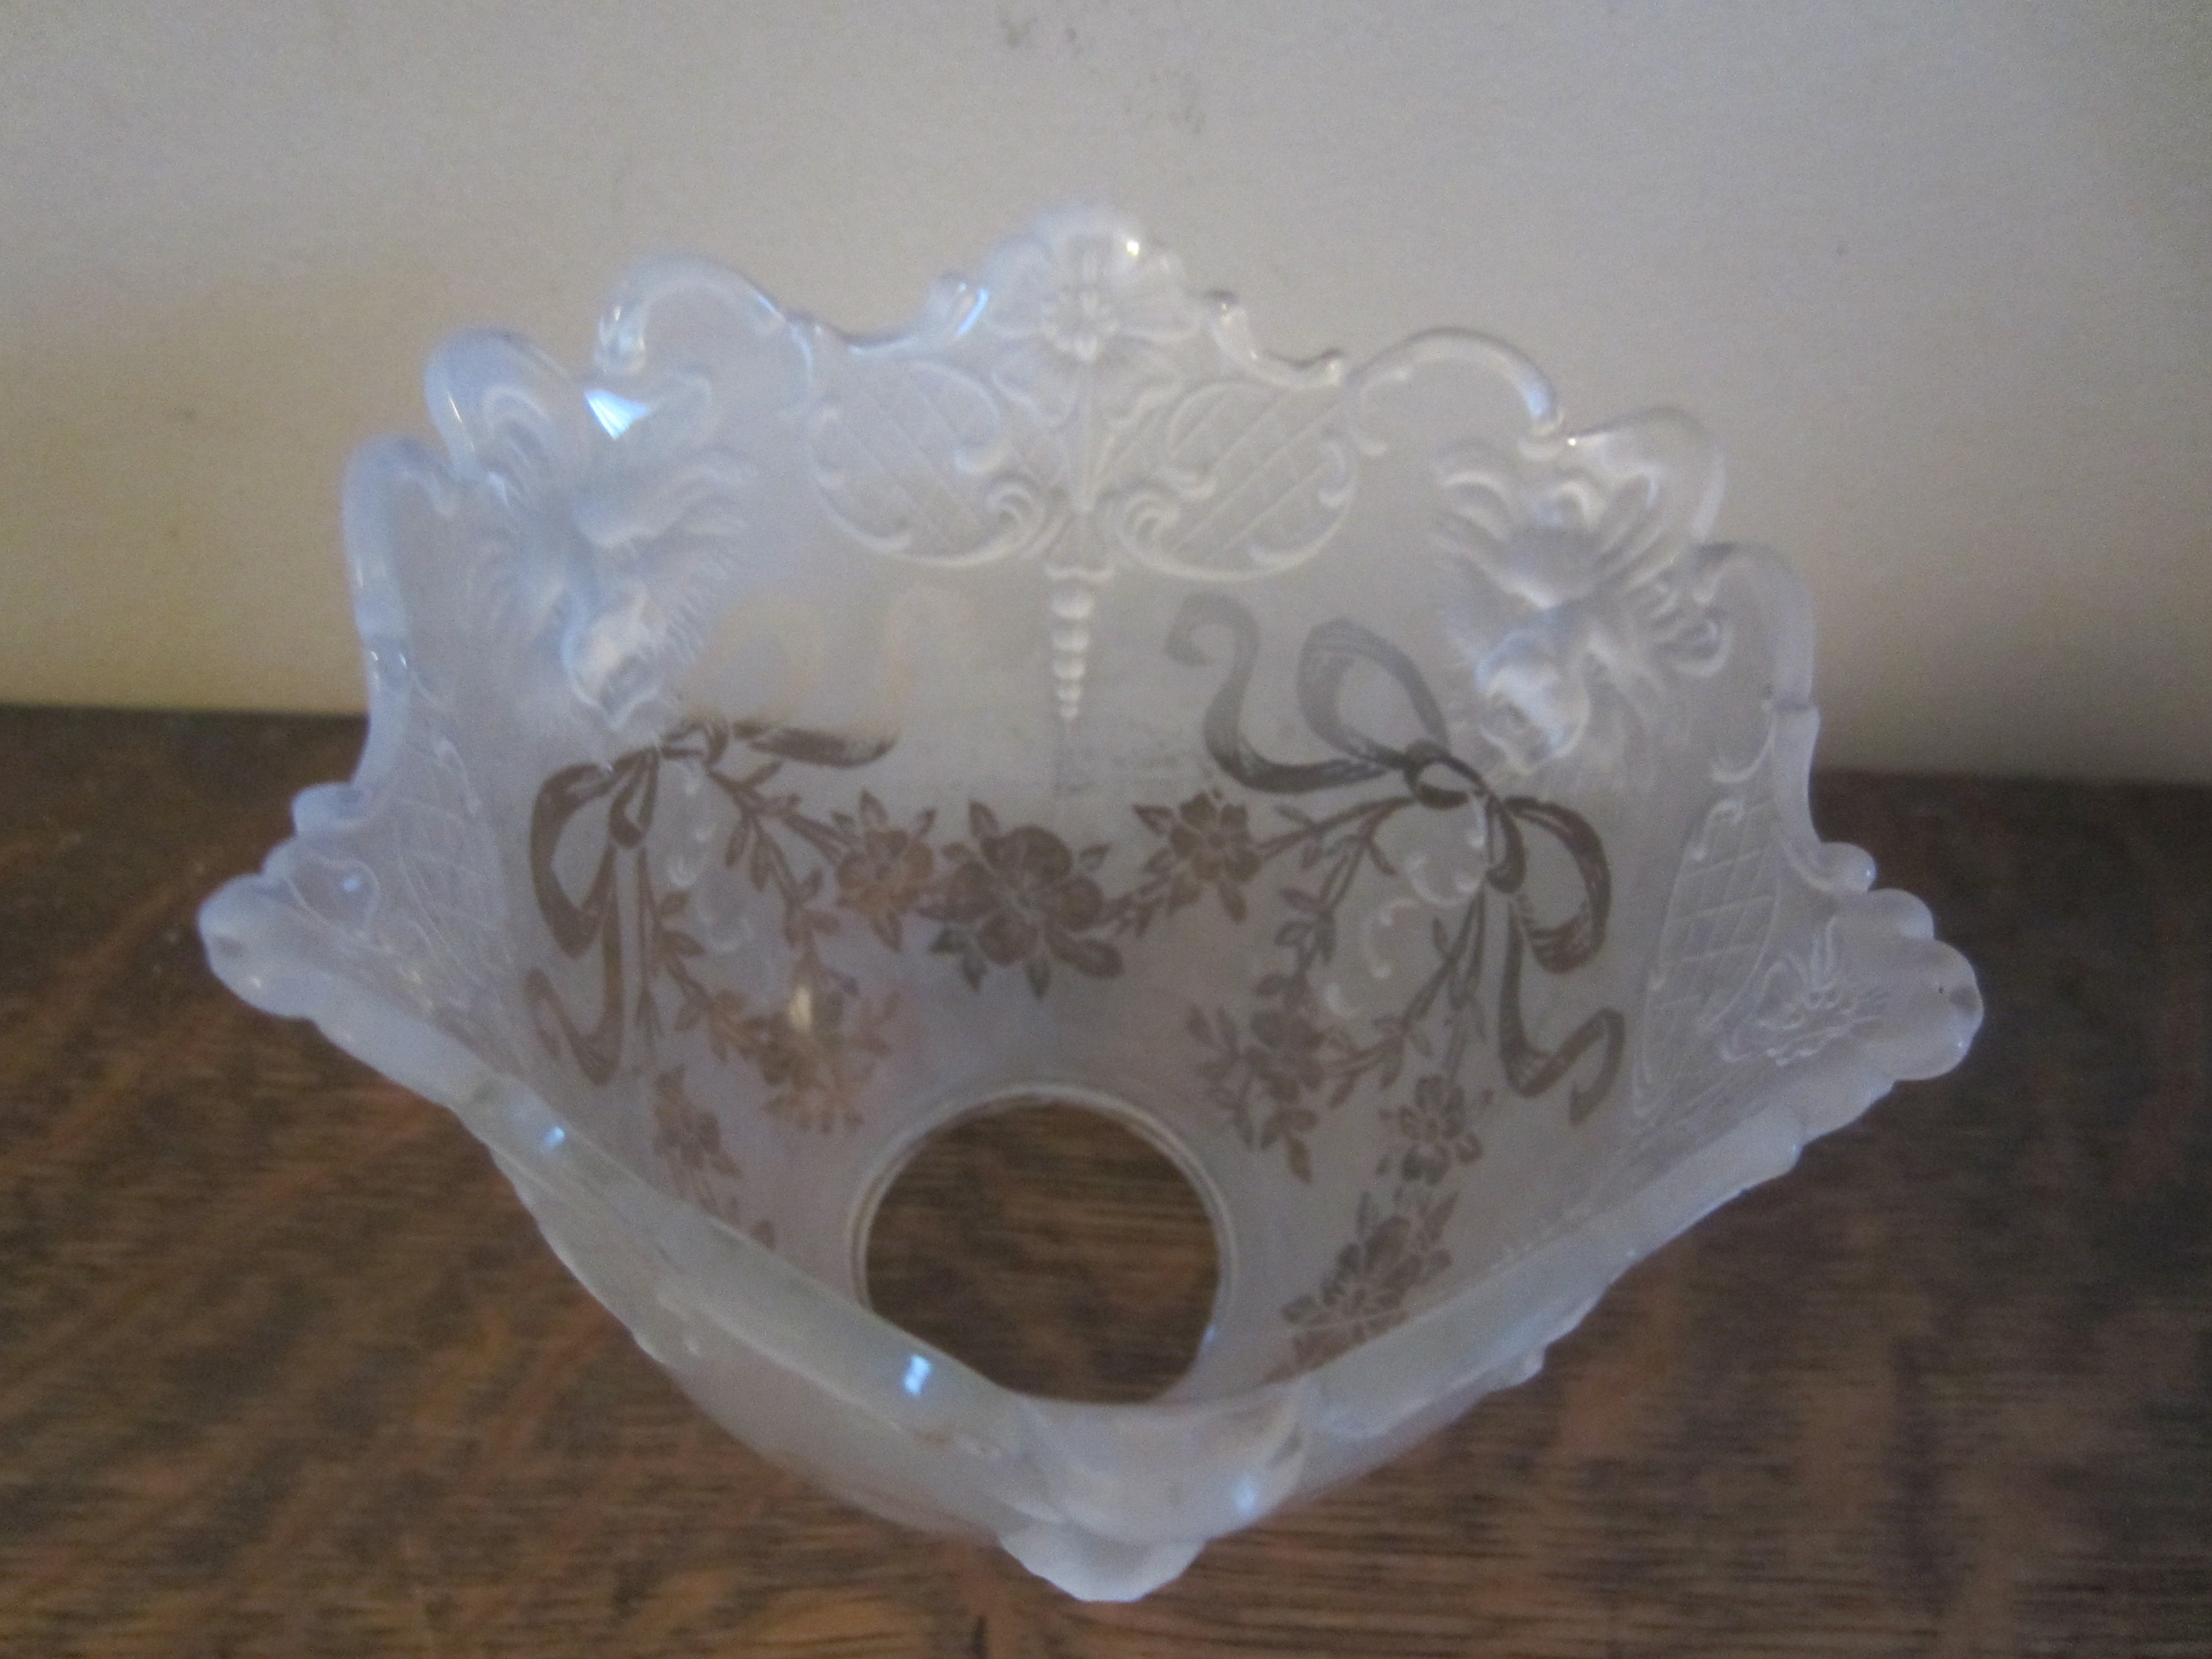 Small Frosted Antique Shade with Flowers, Ribbons and Lions